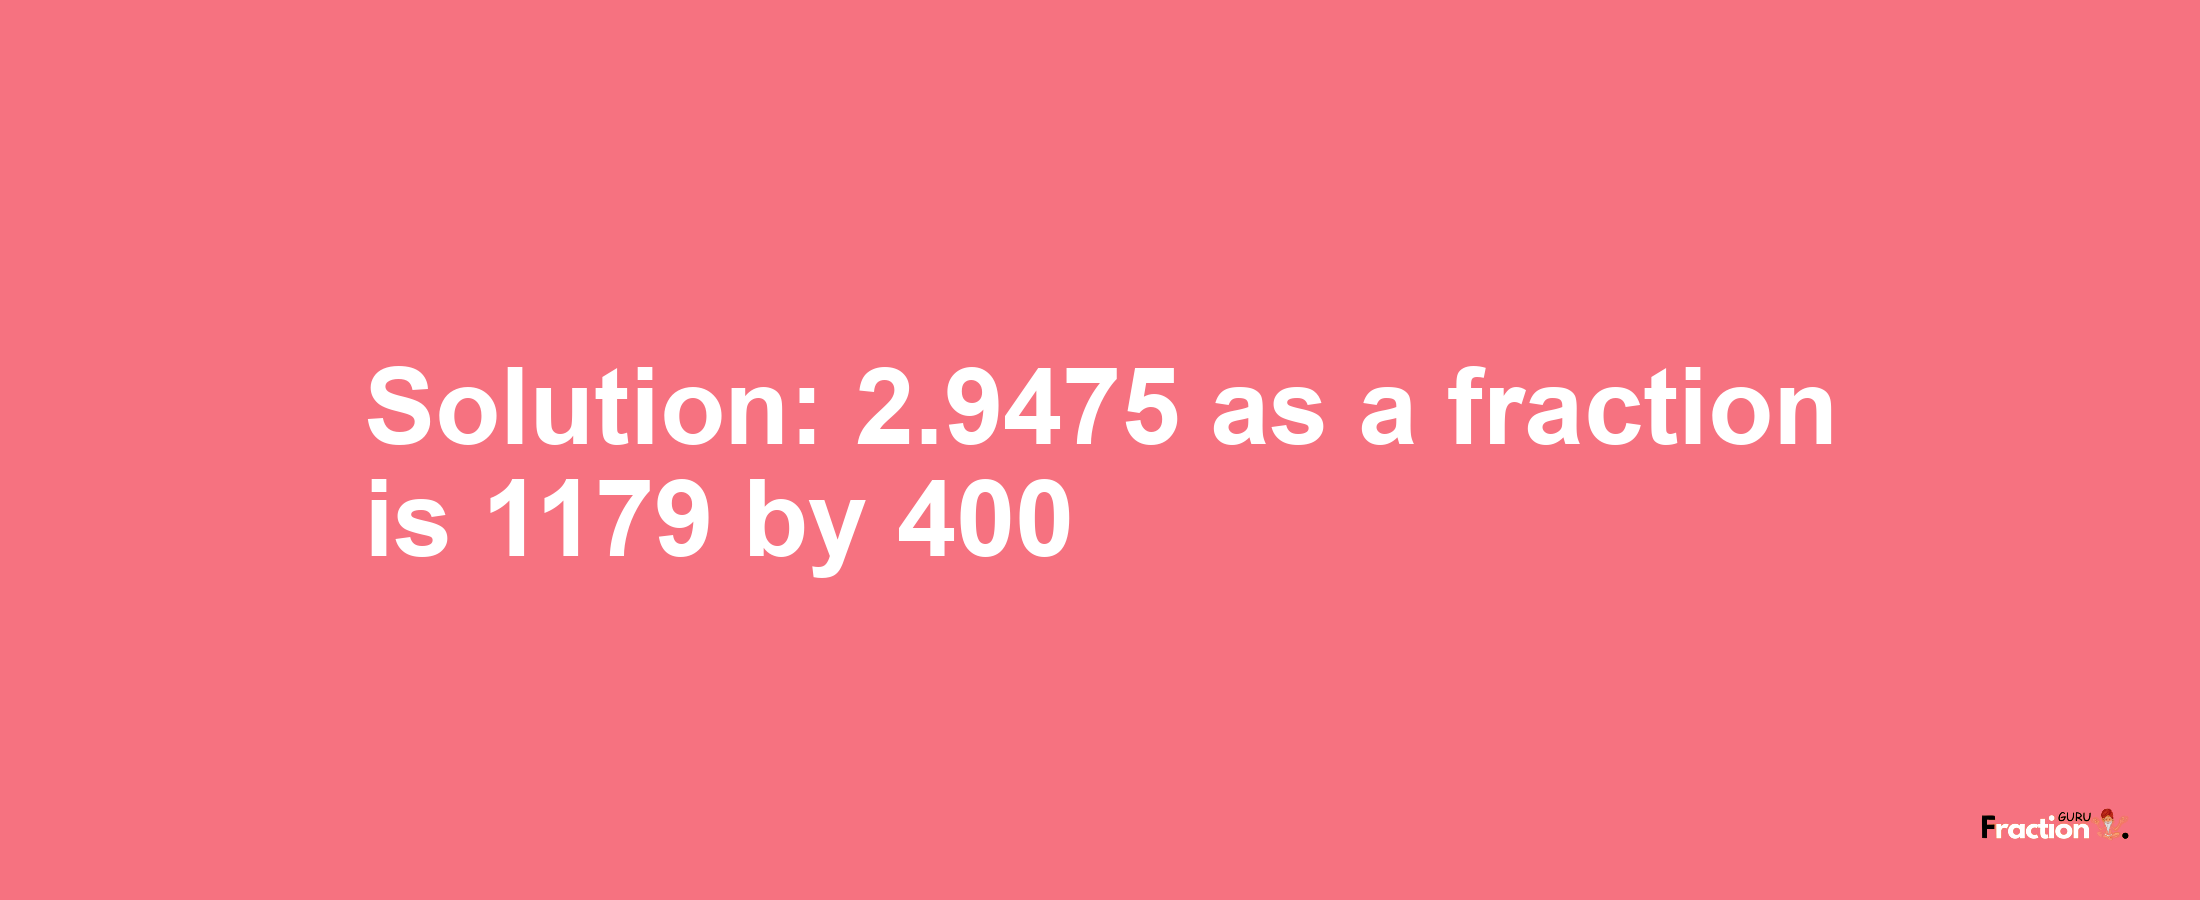 Solution:2.9475 as a fraction is 1179/400